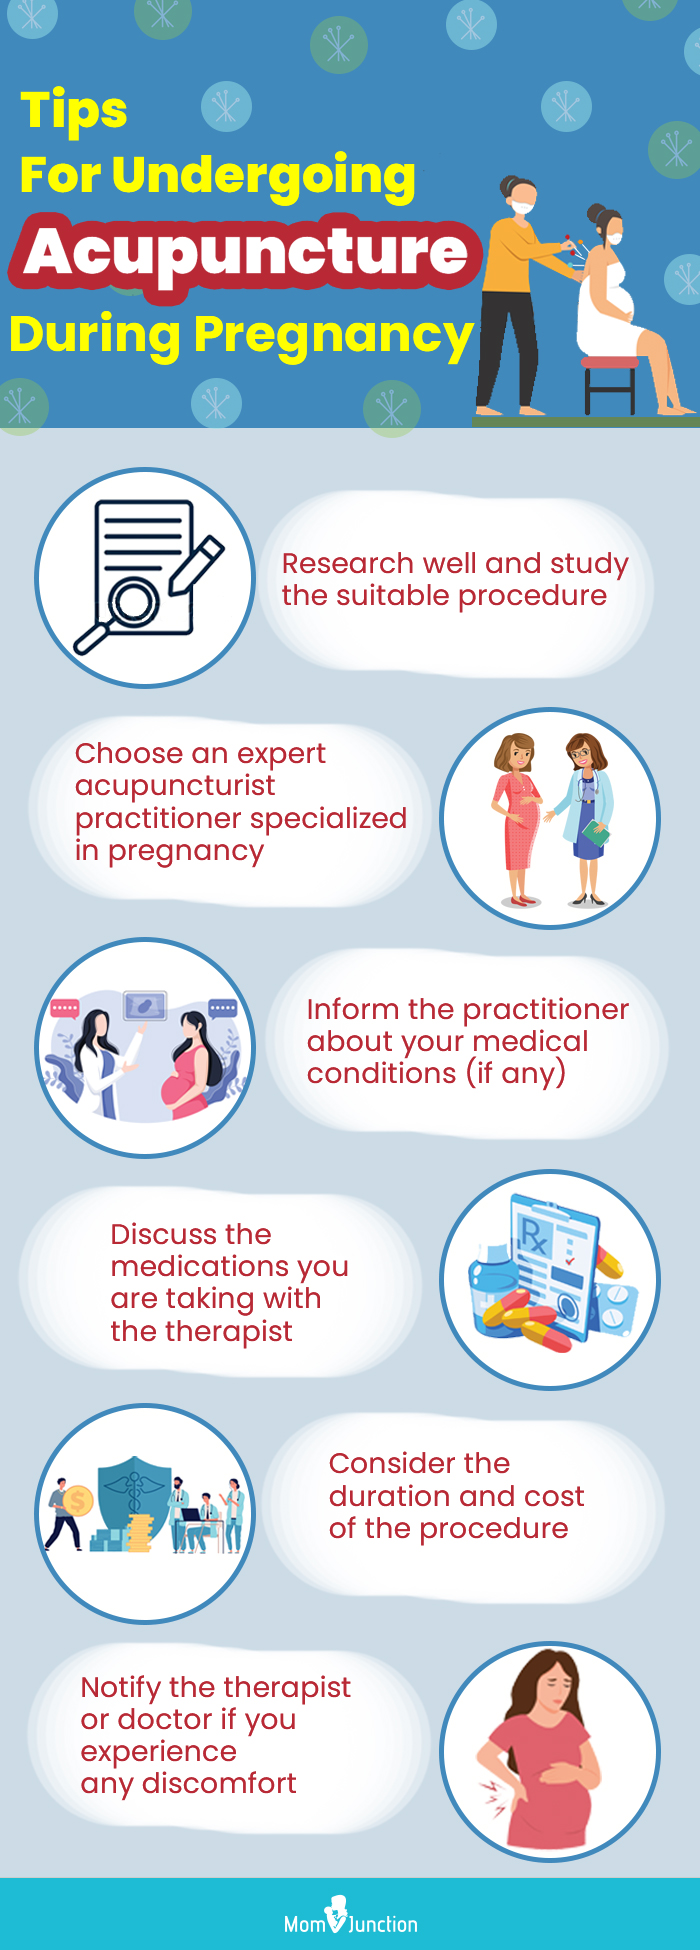 tips for undergoing acupuncture during pregnancy (infographic)